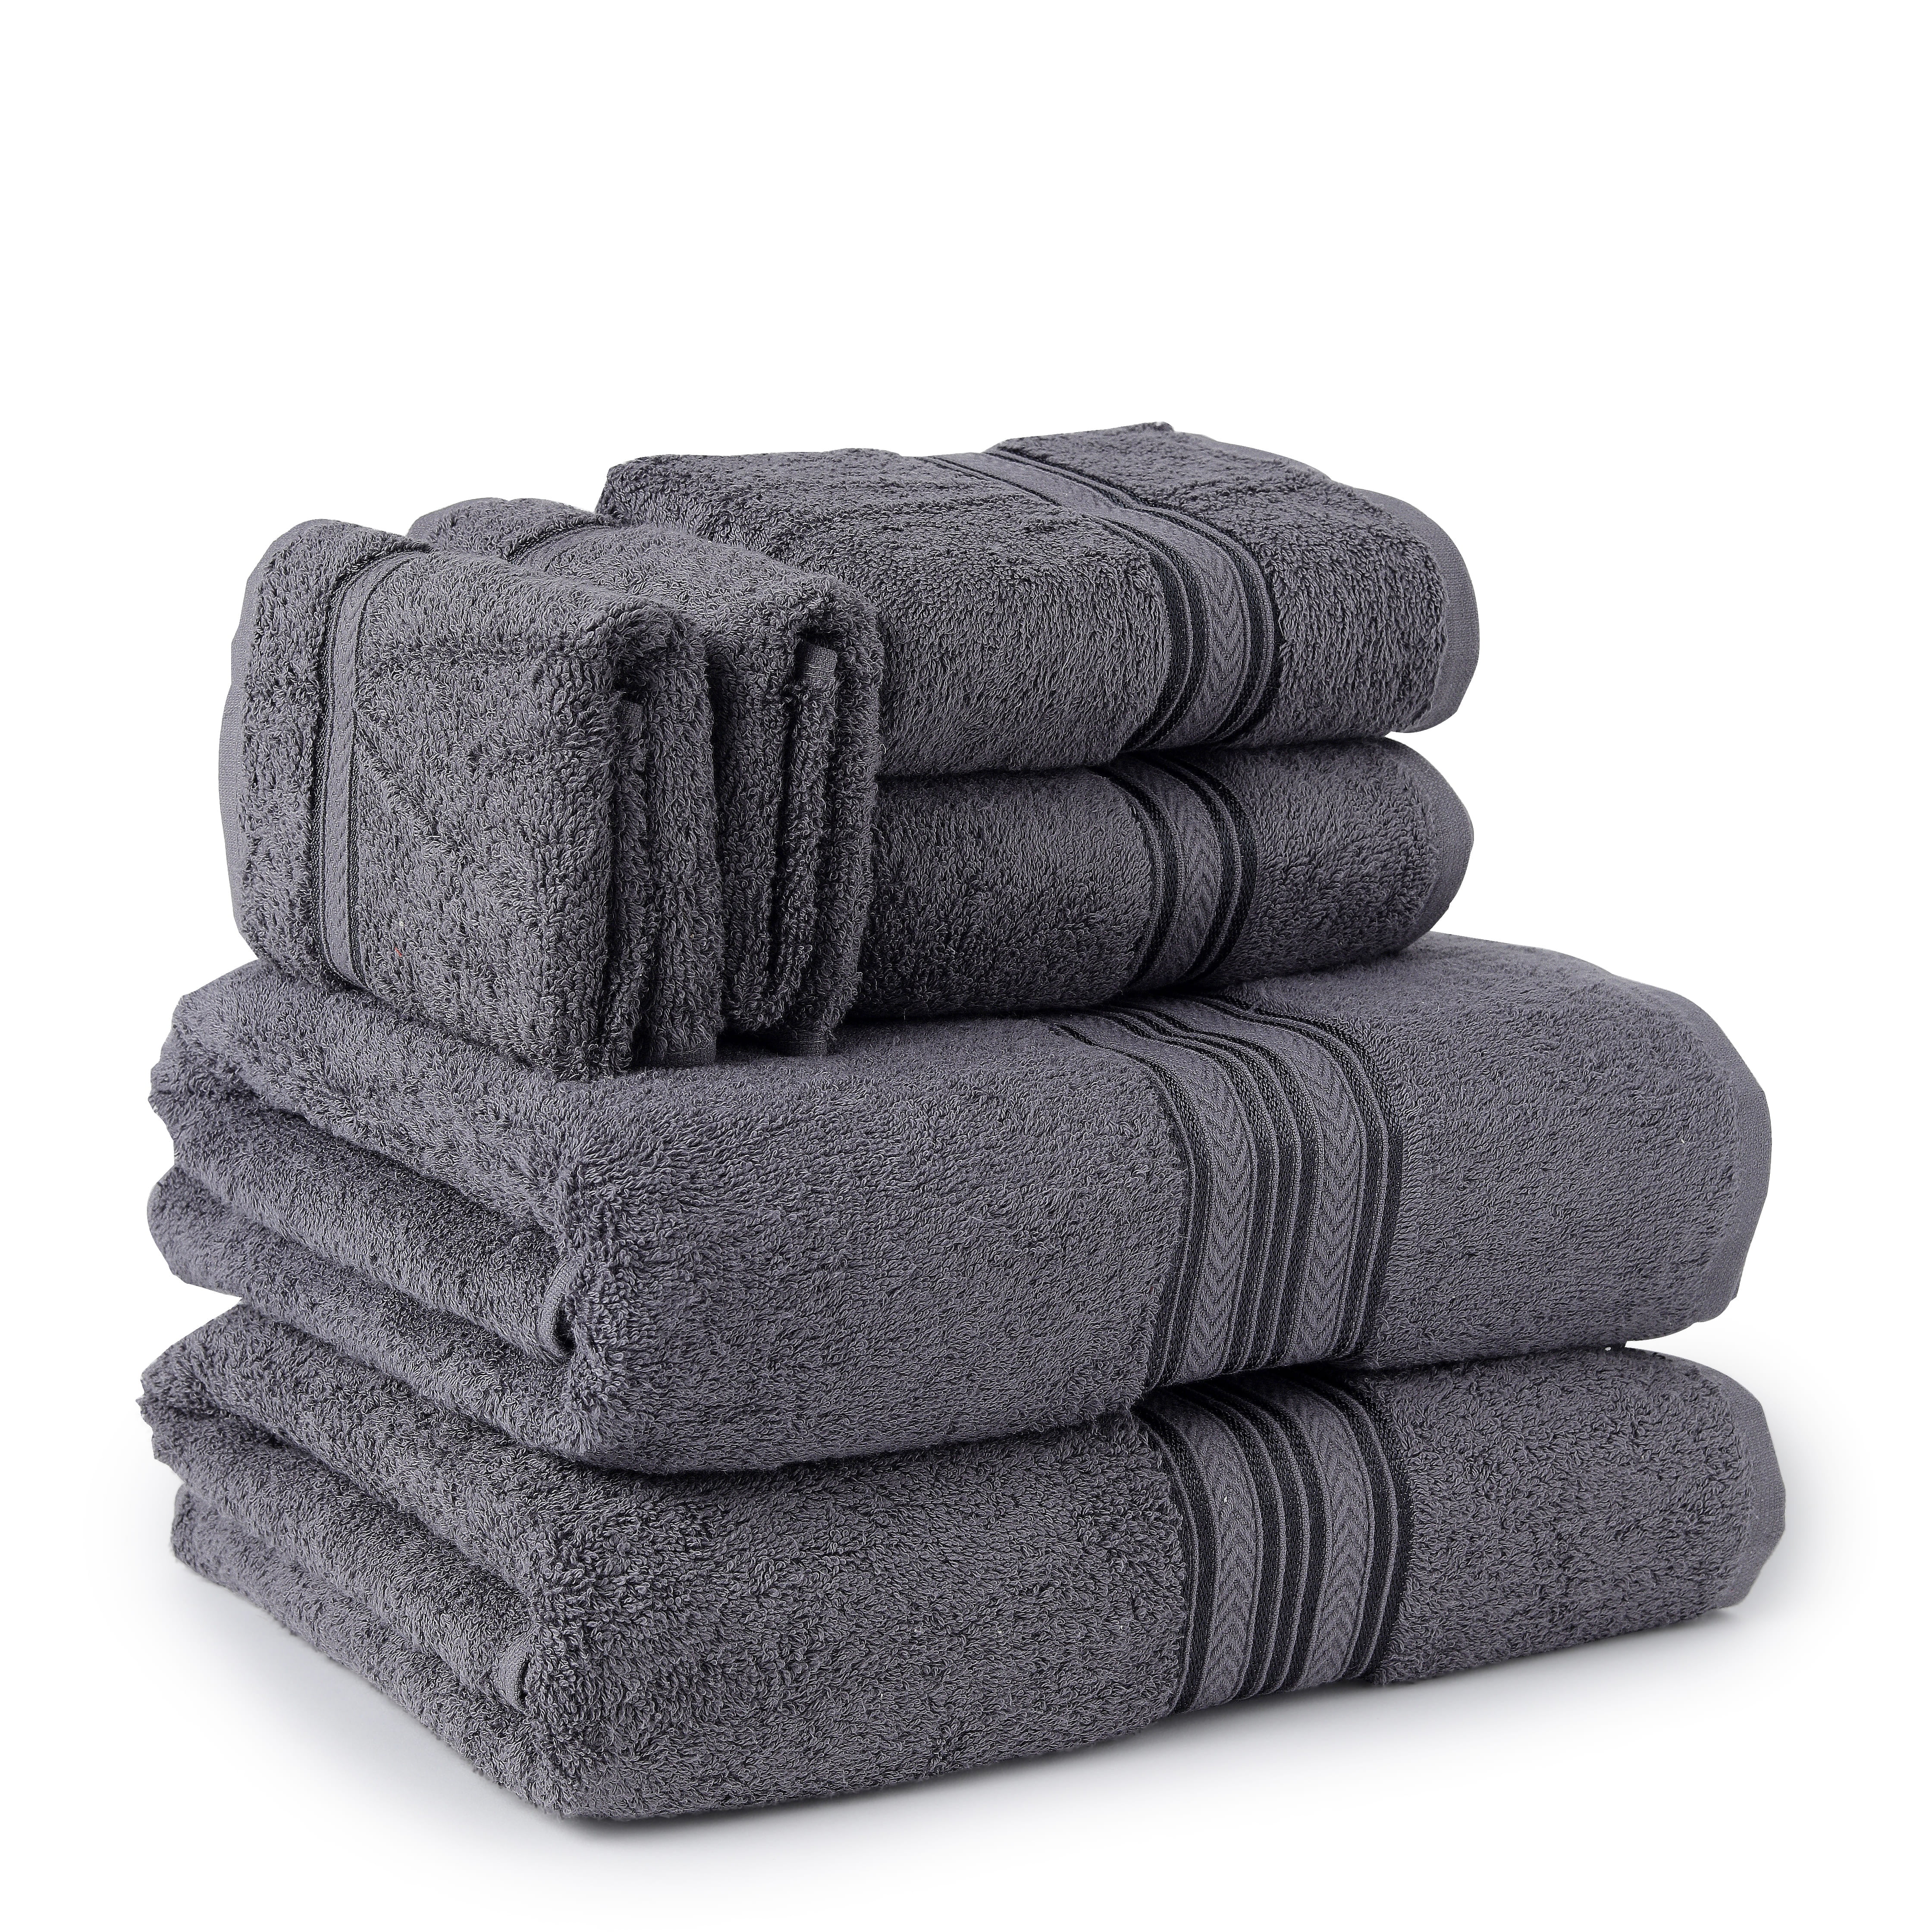 COTTON CRAFT Ultra Soft 6 Piece Towel Set Linen, Luxurious 100% Ringspun  Cotton, Heavy Weight & Absorbent, Rayon Trim - 2 Oversized Large Bath Towels  30x54, 2 Hand Towels 16x28, 2 Wash Cloths 12x12